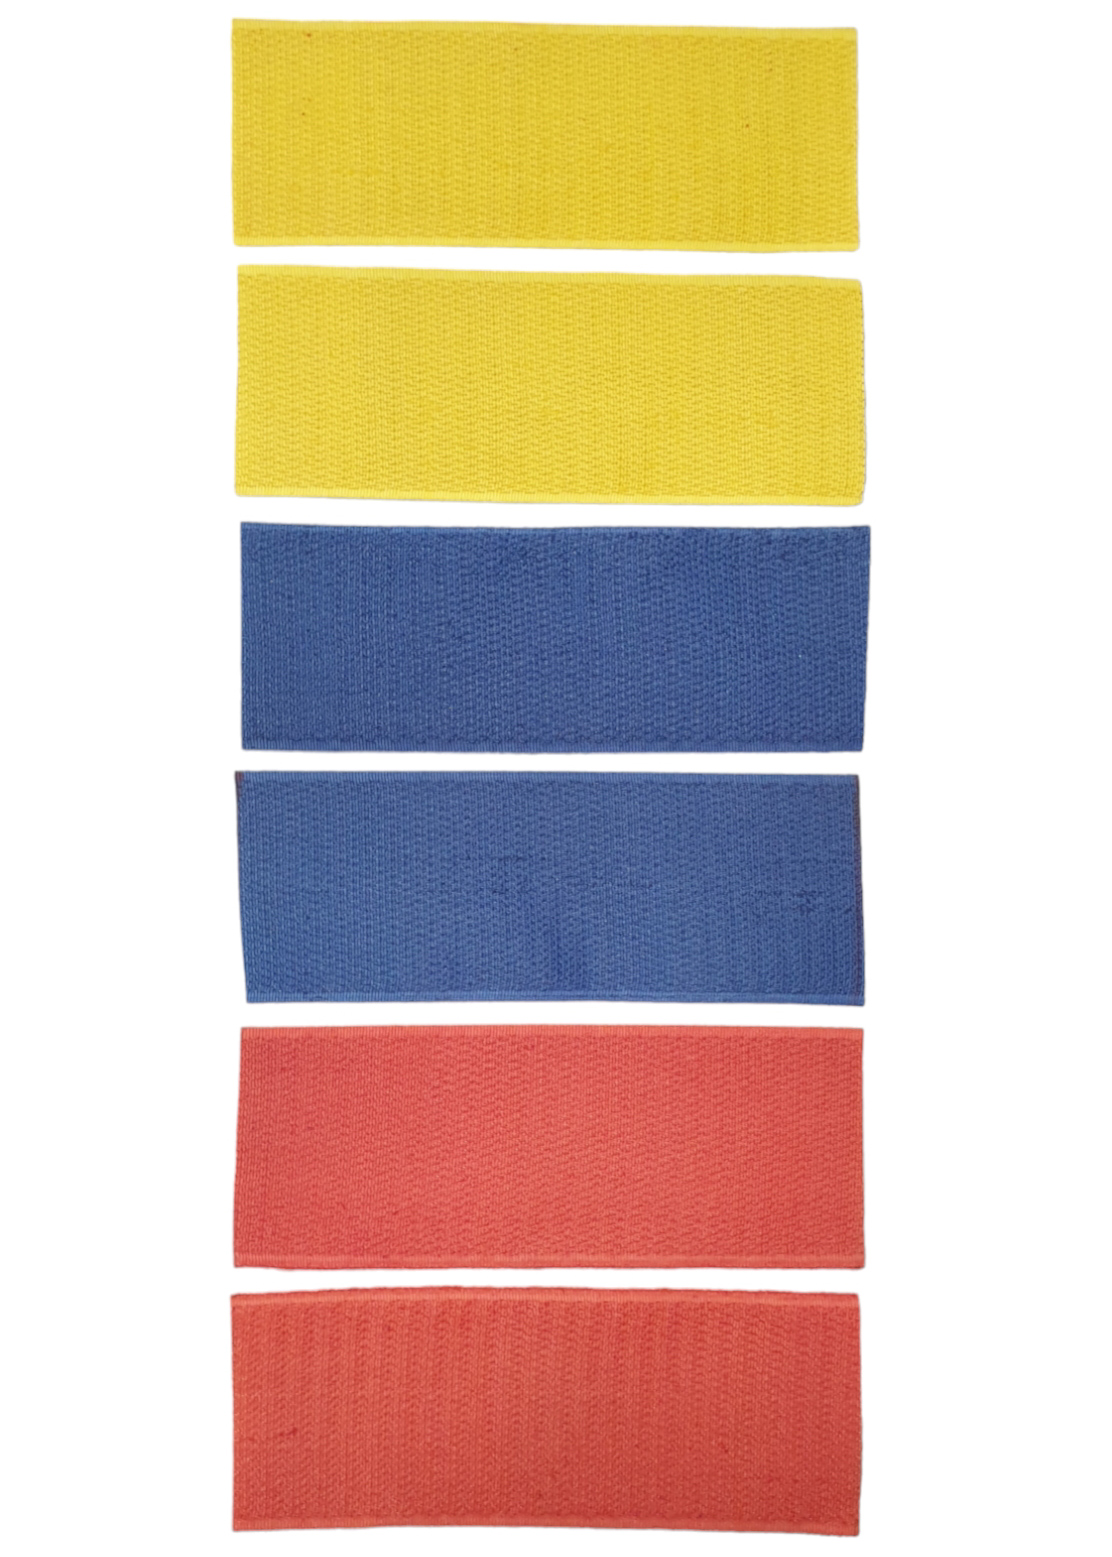 Colored Velcro Tags (3 Different Colors) 6 Pieces